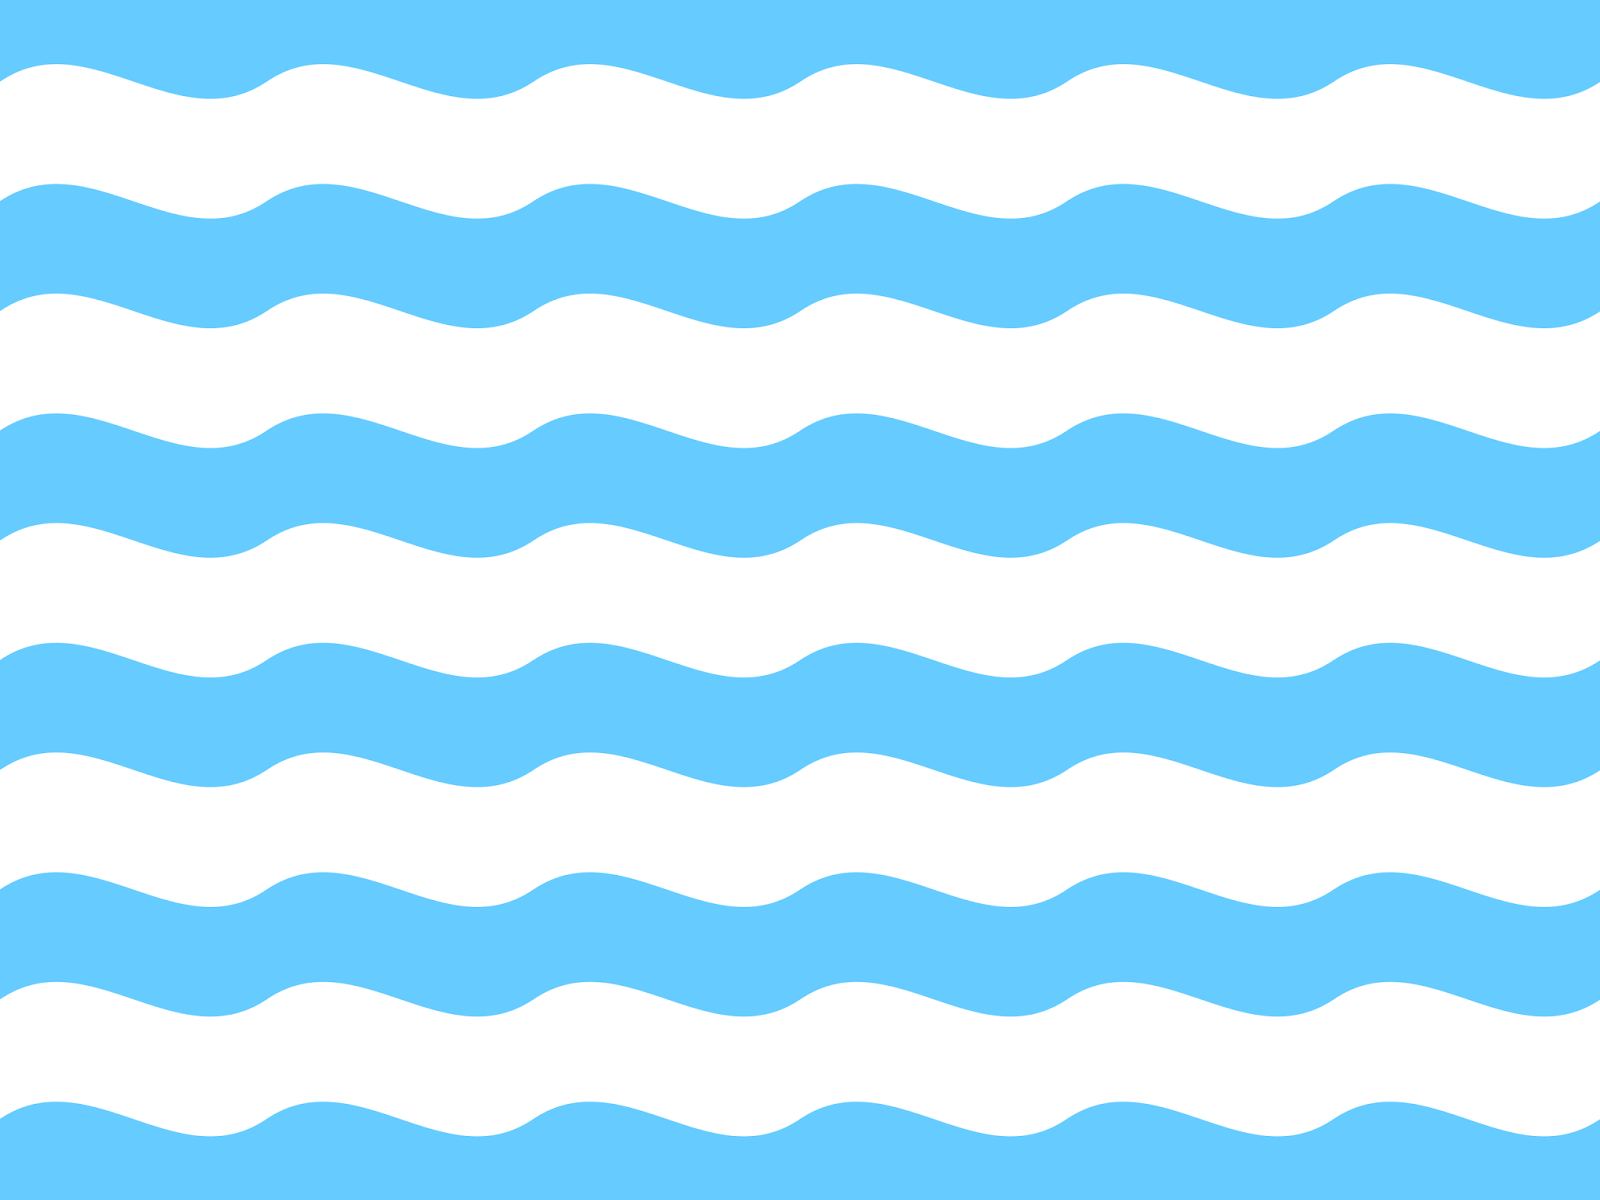 12 Ocean Waves Border Free Cliparts That You Can Download To You